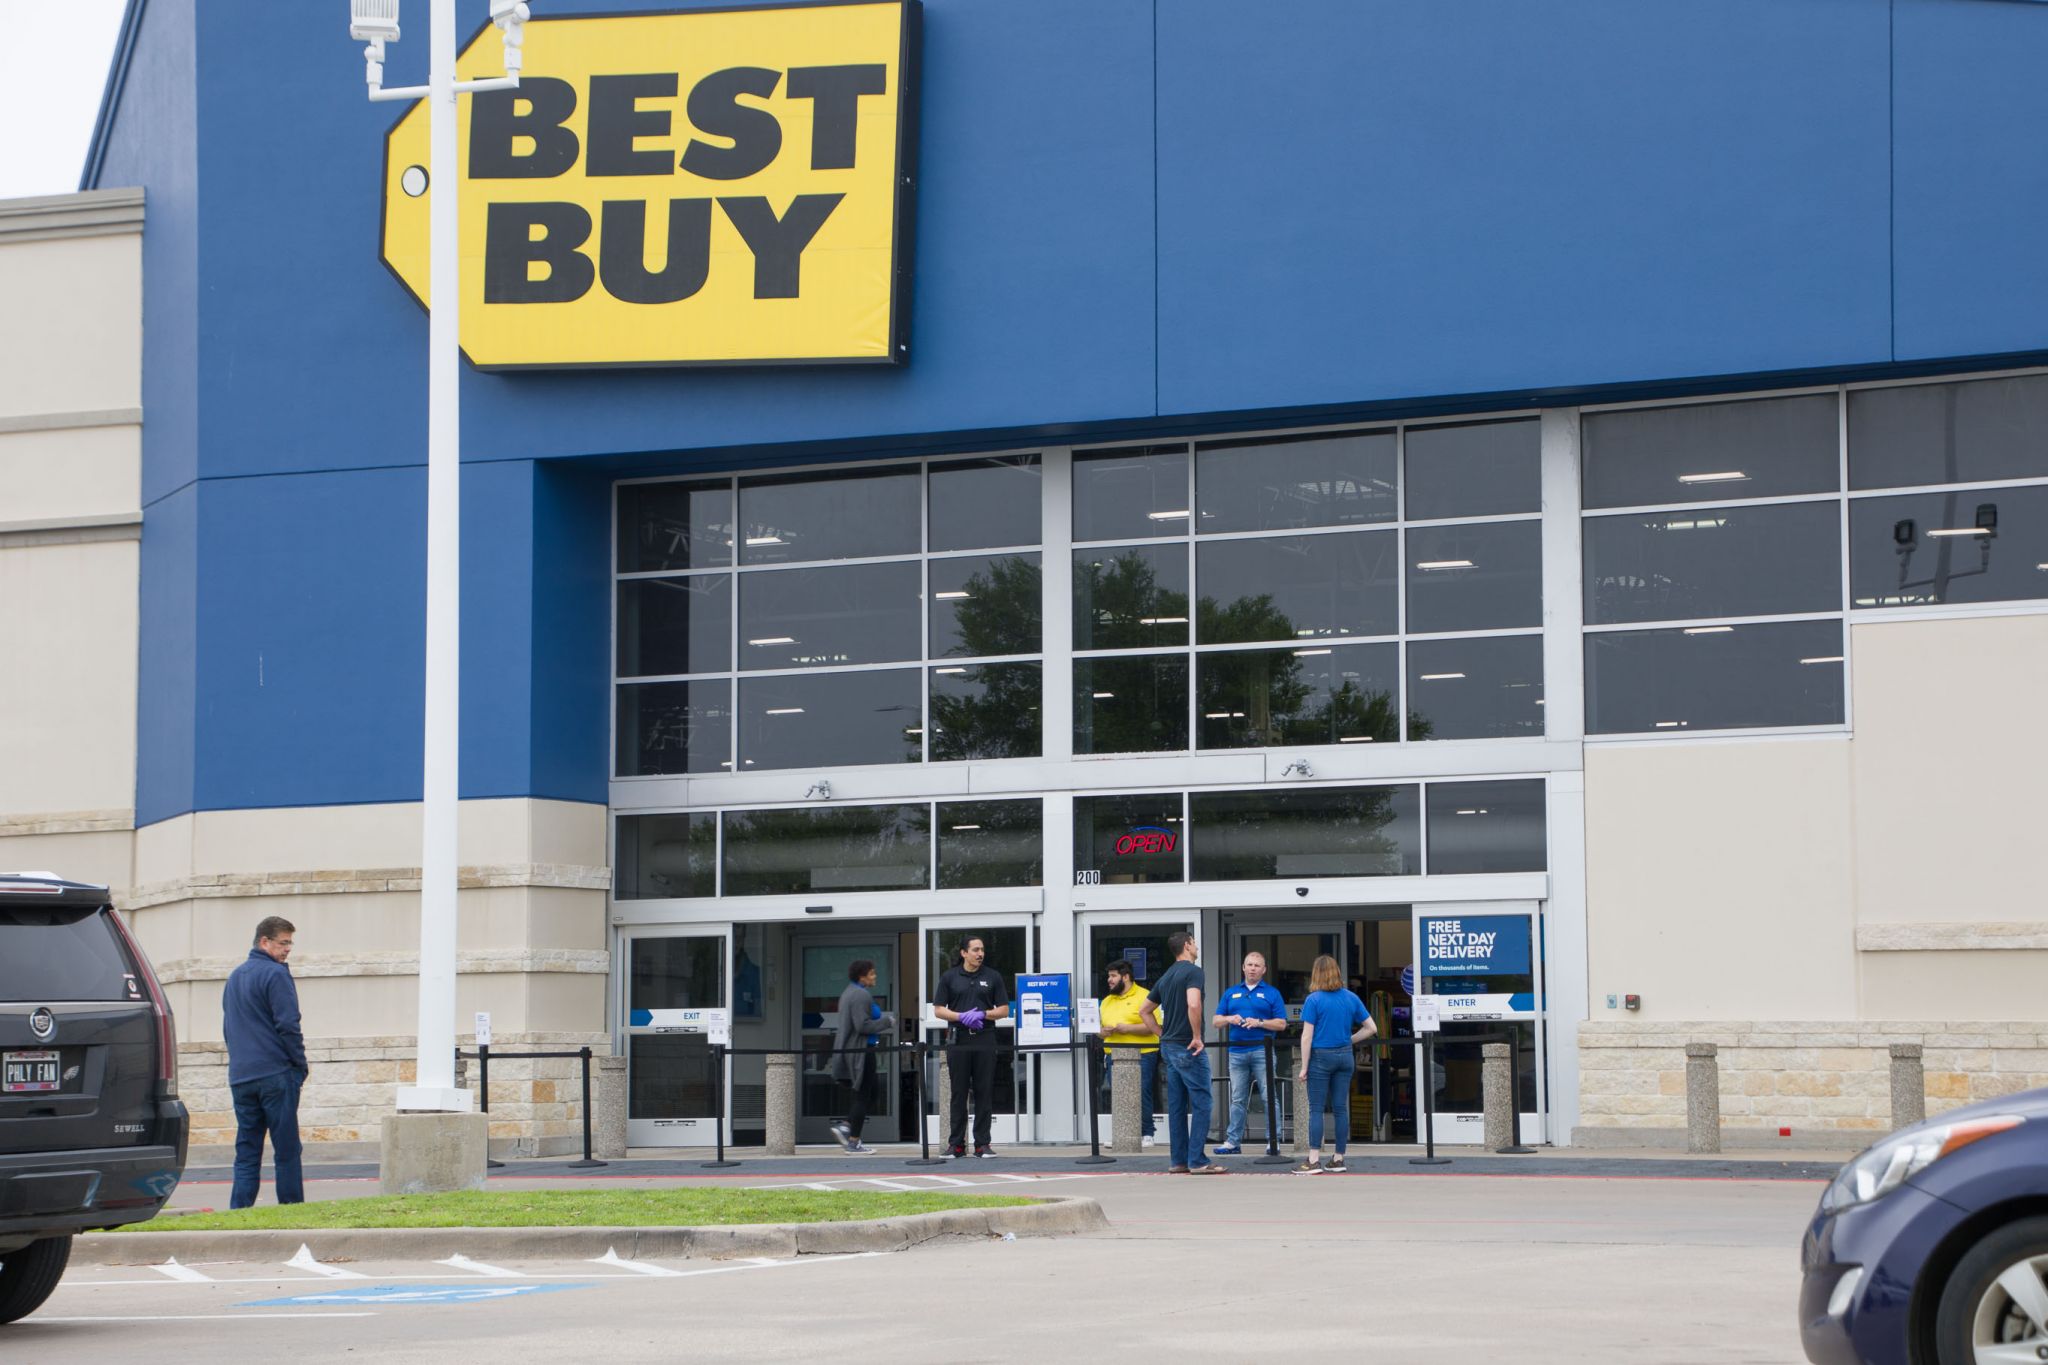 Best Buy's Labor Day sale is in full swing with Smart TVs as low as 99